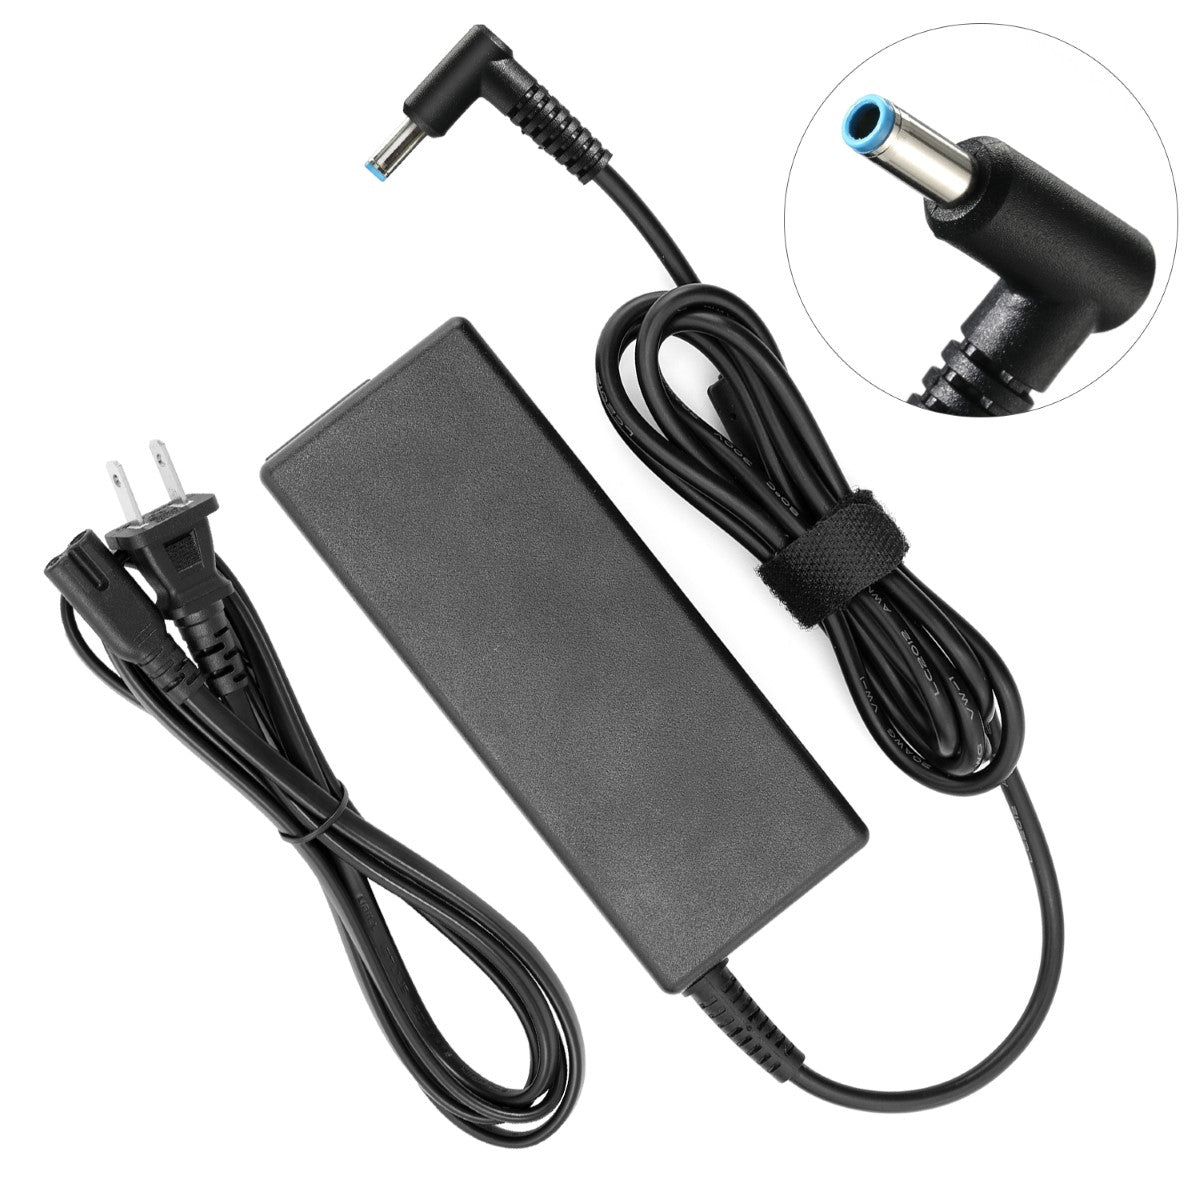 AC Adapter Charger for hp Envy Touchsmart 15-k151us Notebook.